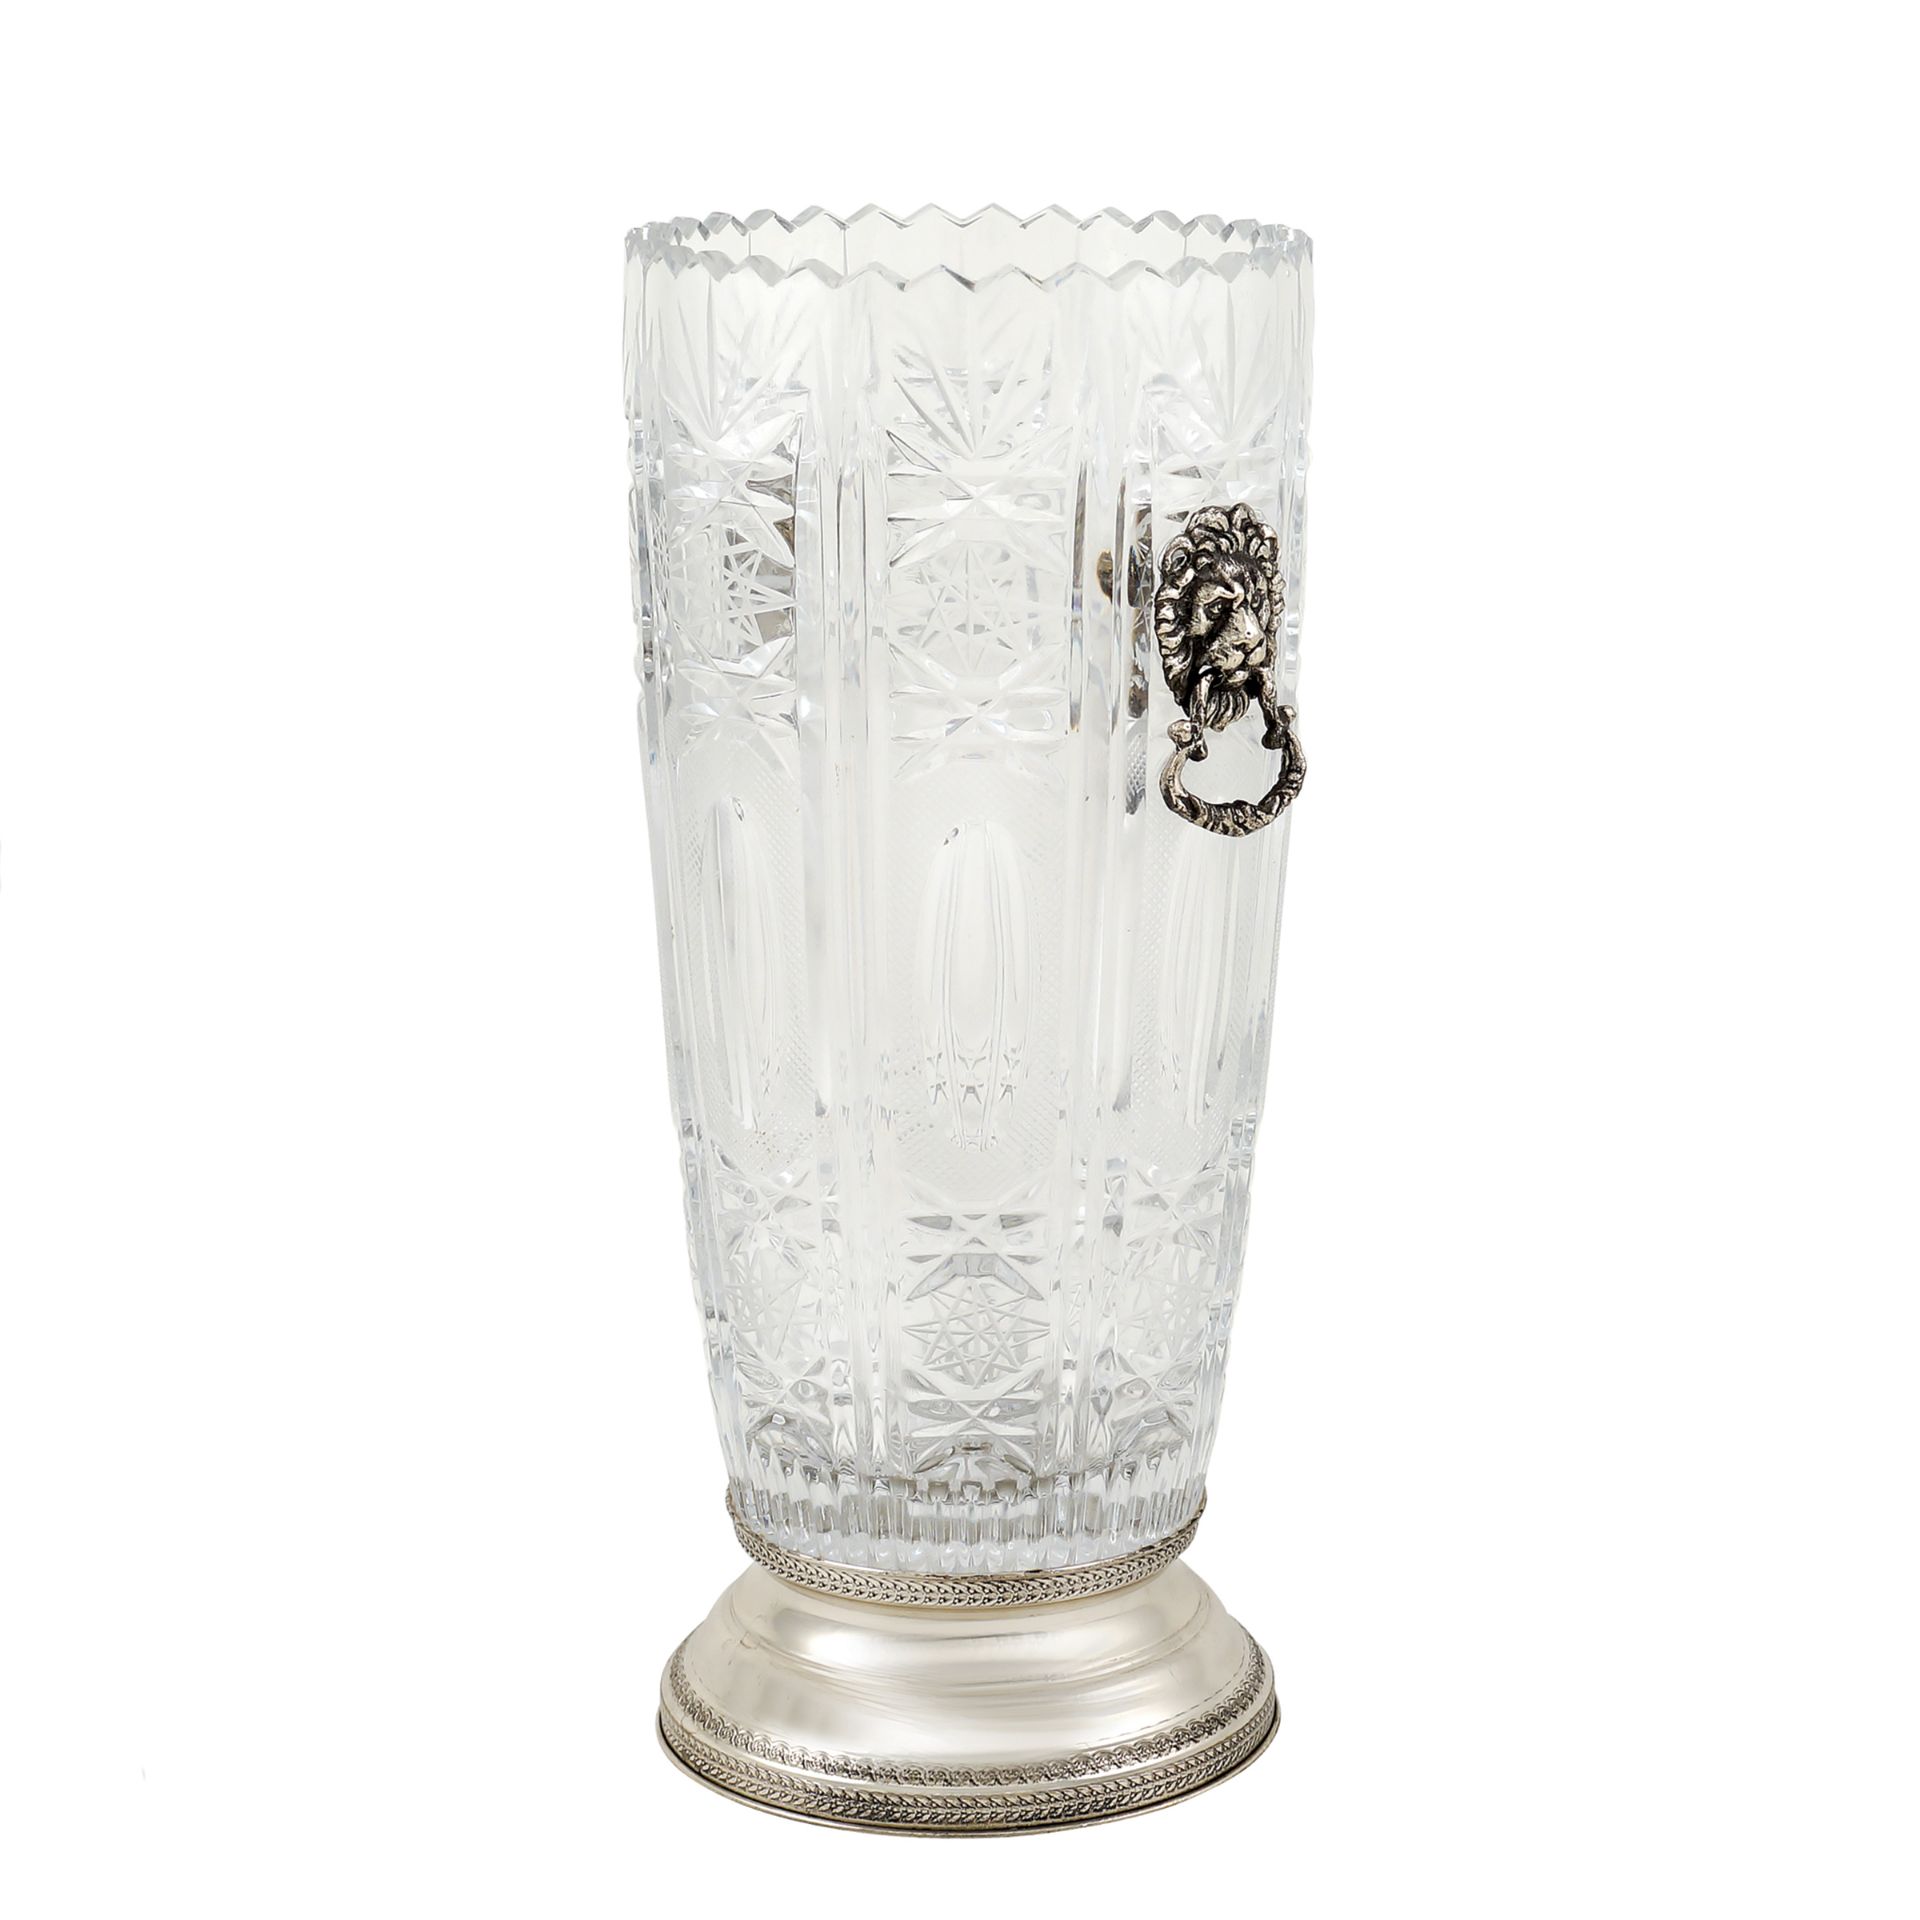 A crystal and silver vase Boemia, 20th century h. 31 - d .14 cm.